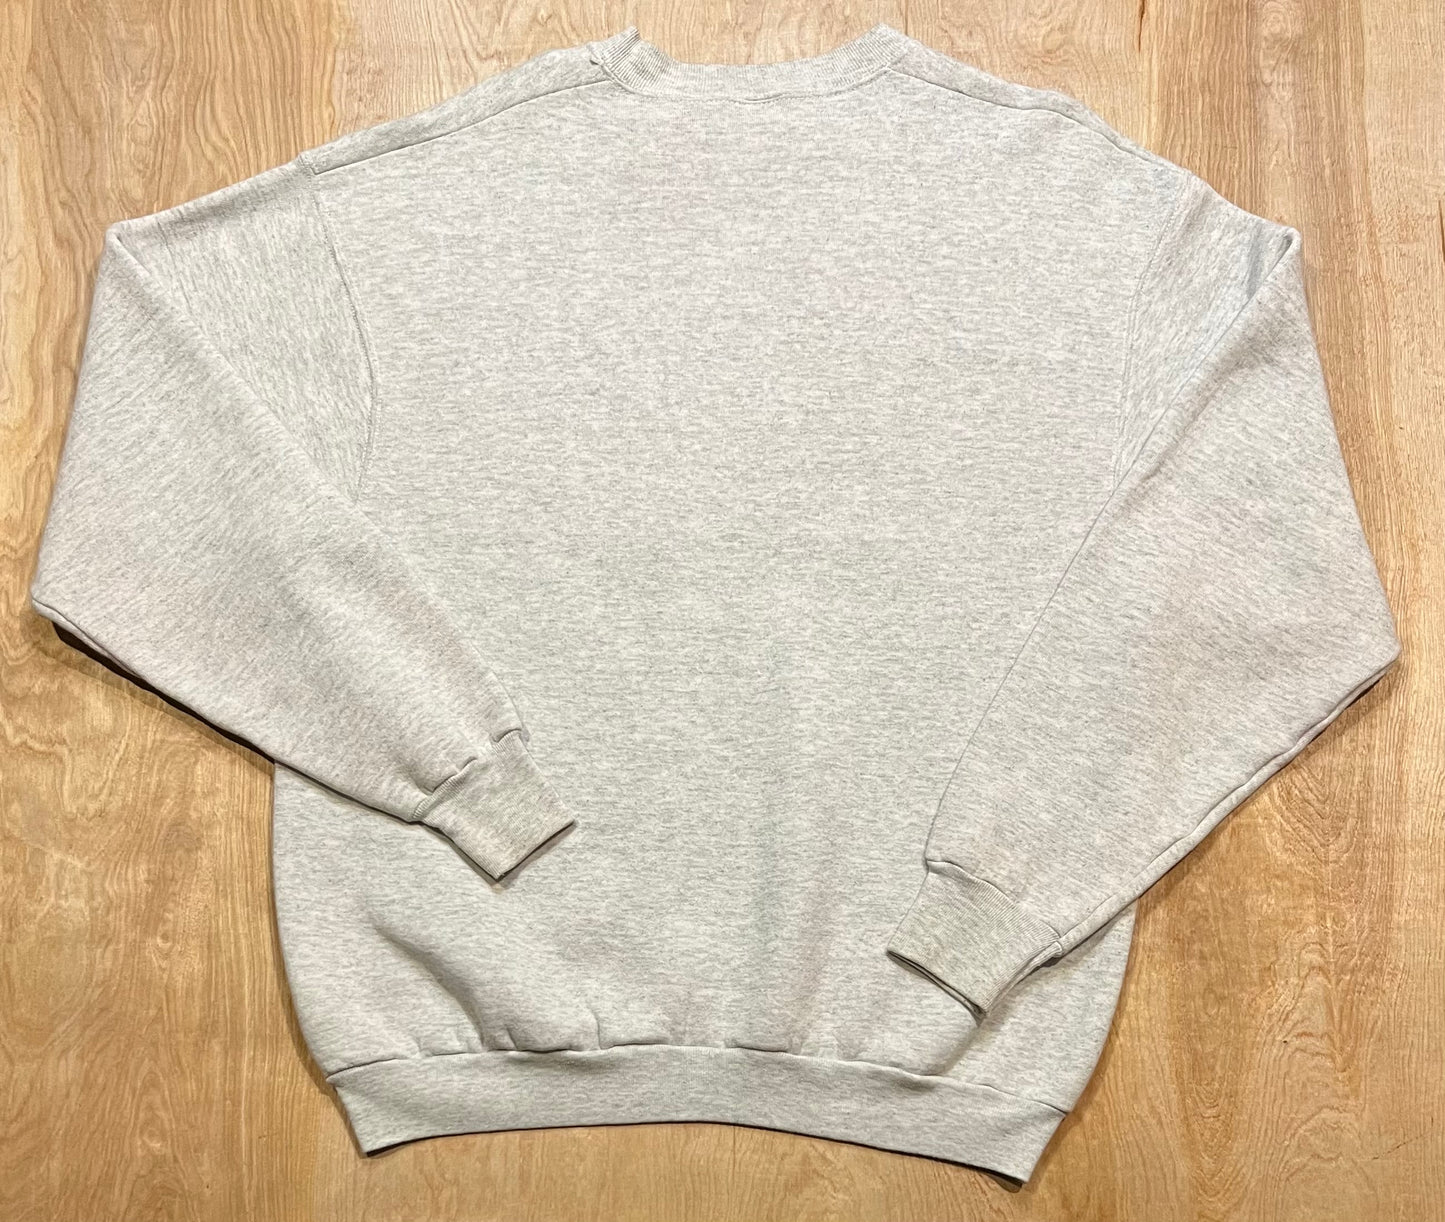 Vintage Lincoln Athletic Department Fruit of the Loom Crewneck